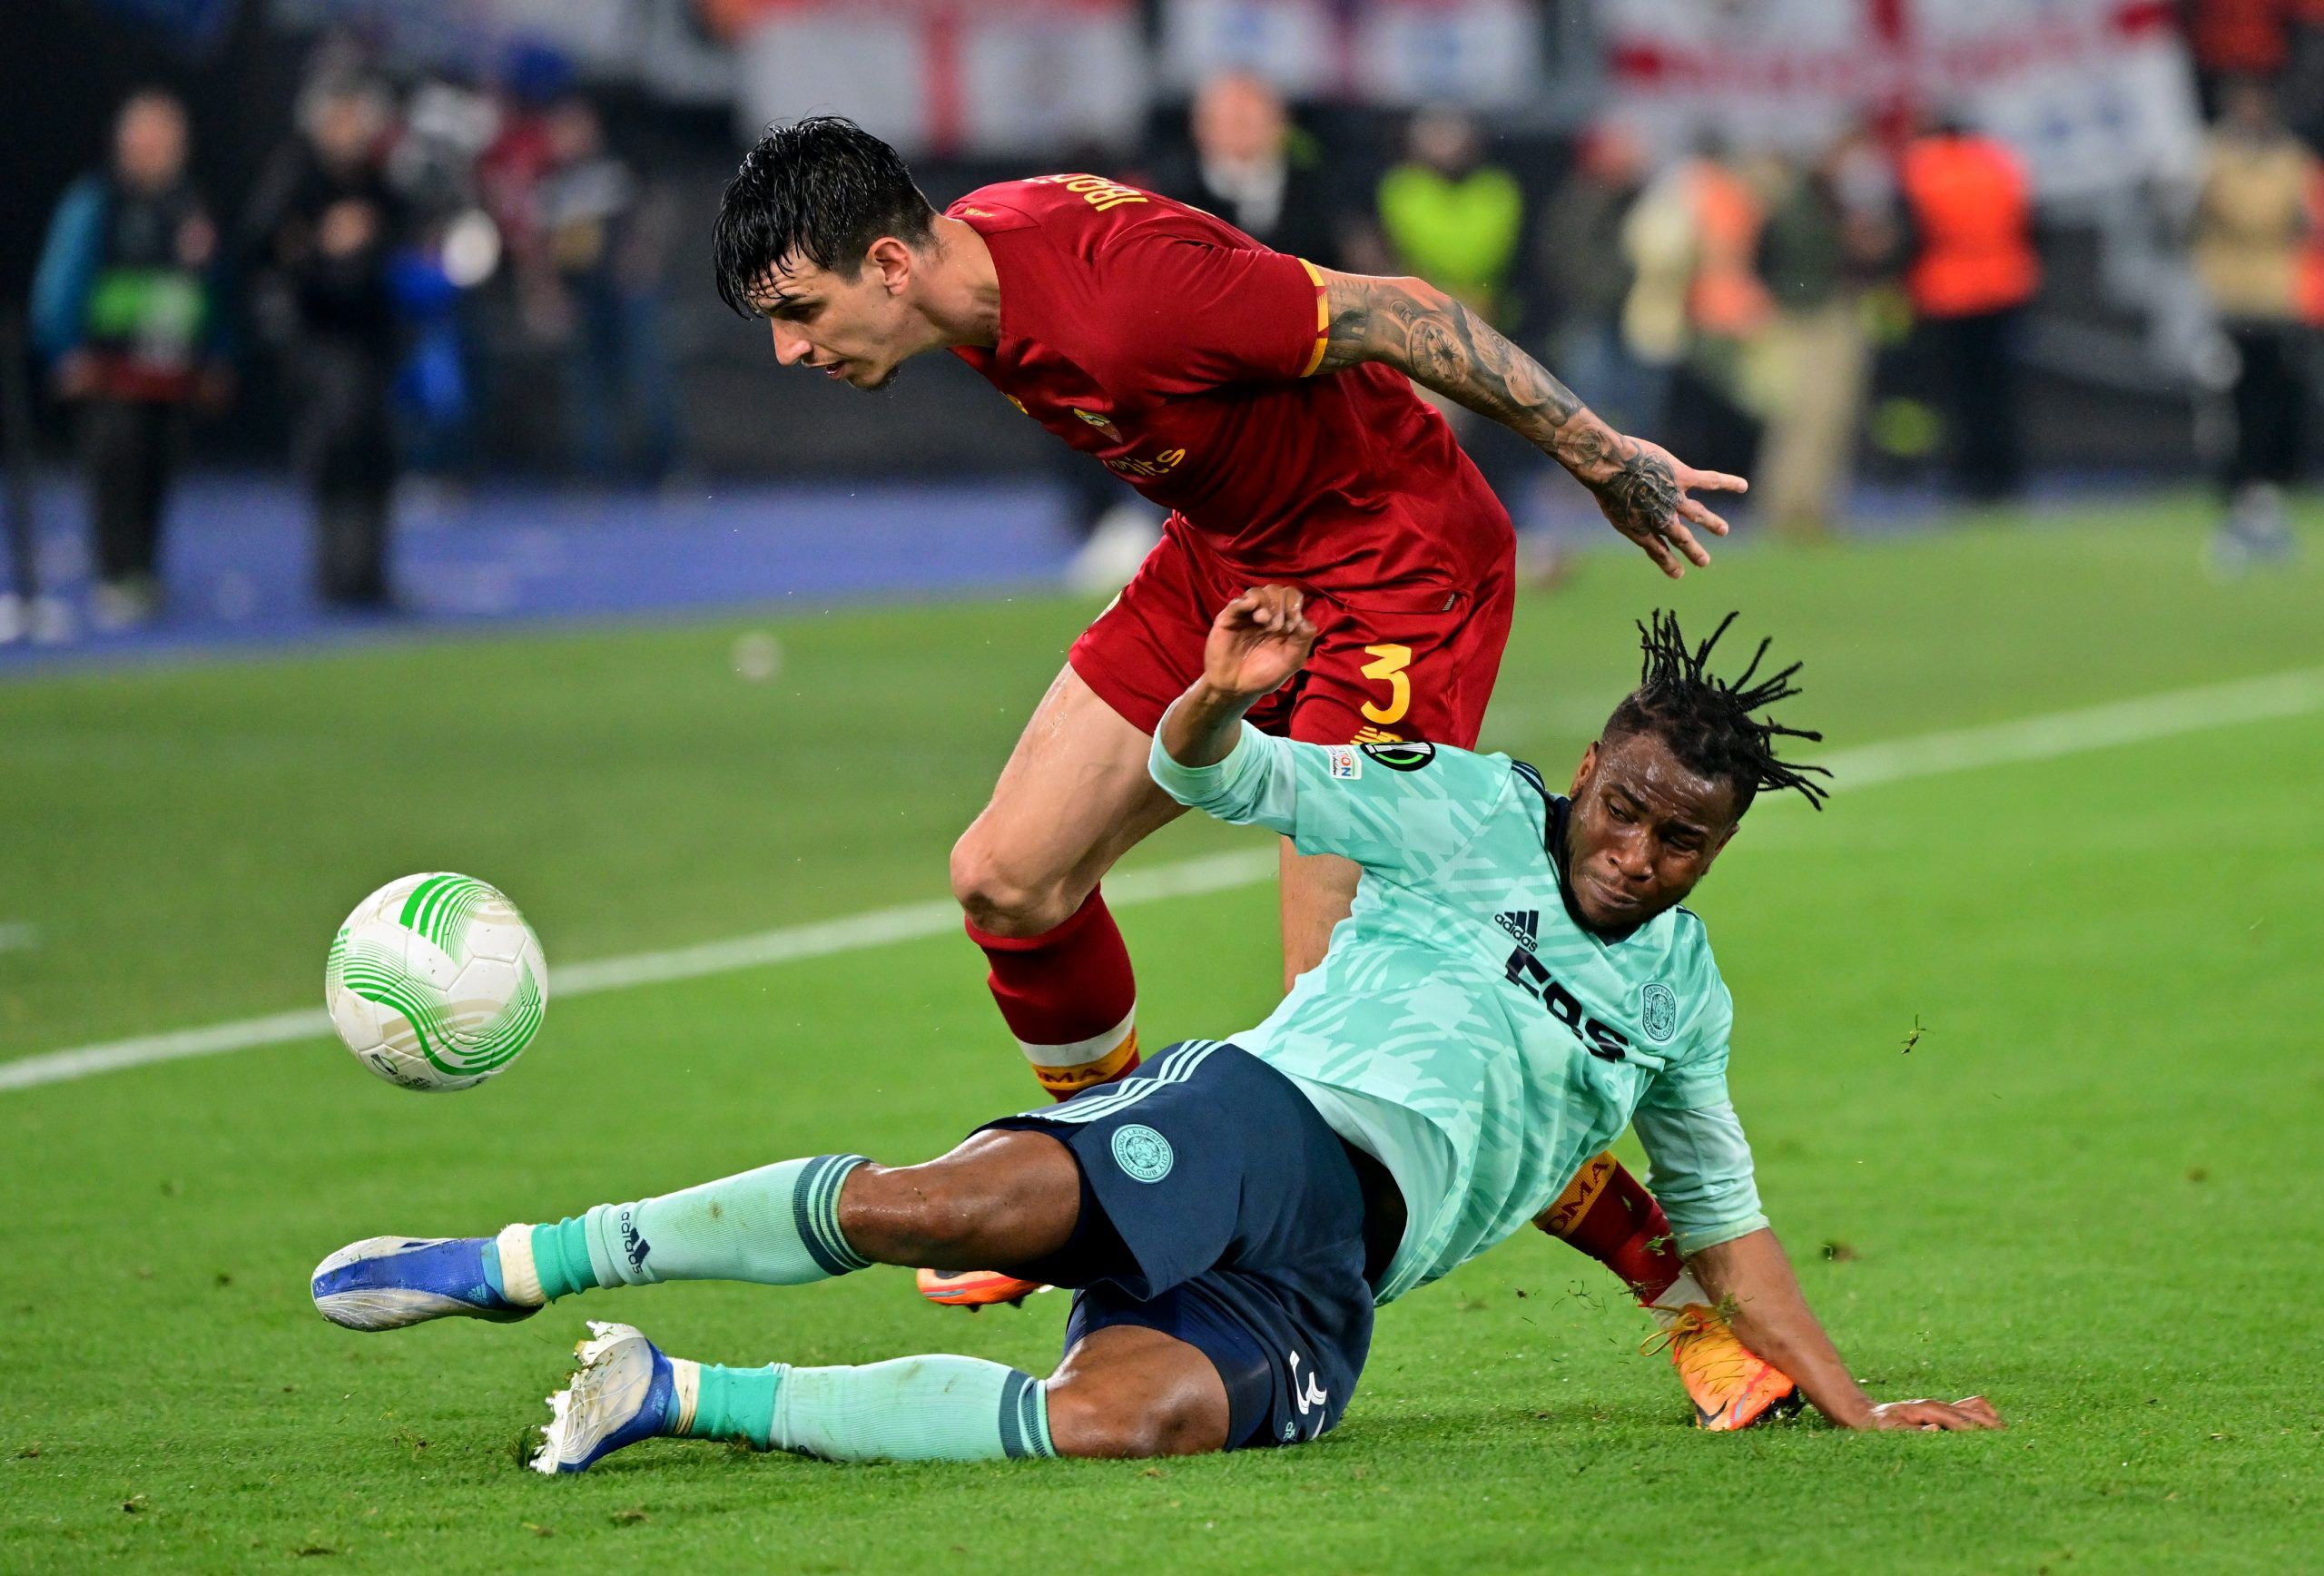 Soccer Football - Europa Conference League - Semi Final - Second Leg - AS Roma v Leicester City - Stadio Olimpico, Roma, Italy - May 5, 2022 AS Roma's Roger Ibanez in action with Leicester City's Ademola Lookman REUTERS/Alberto Lingria